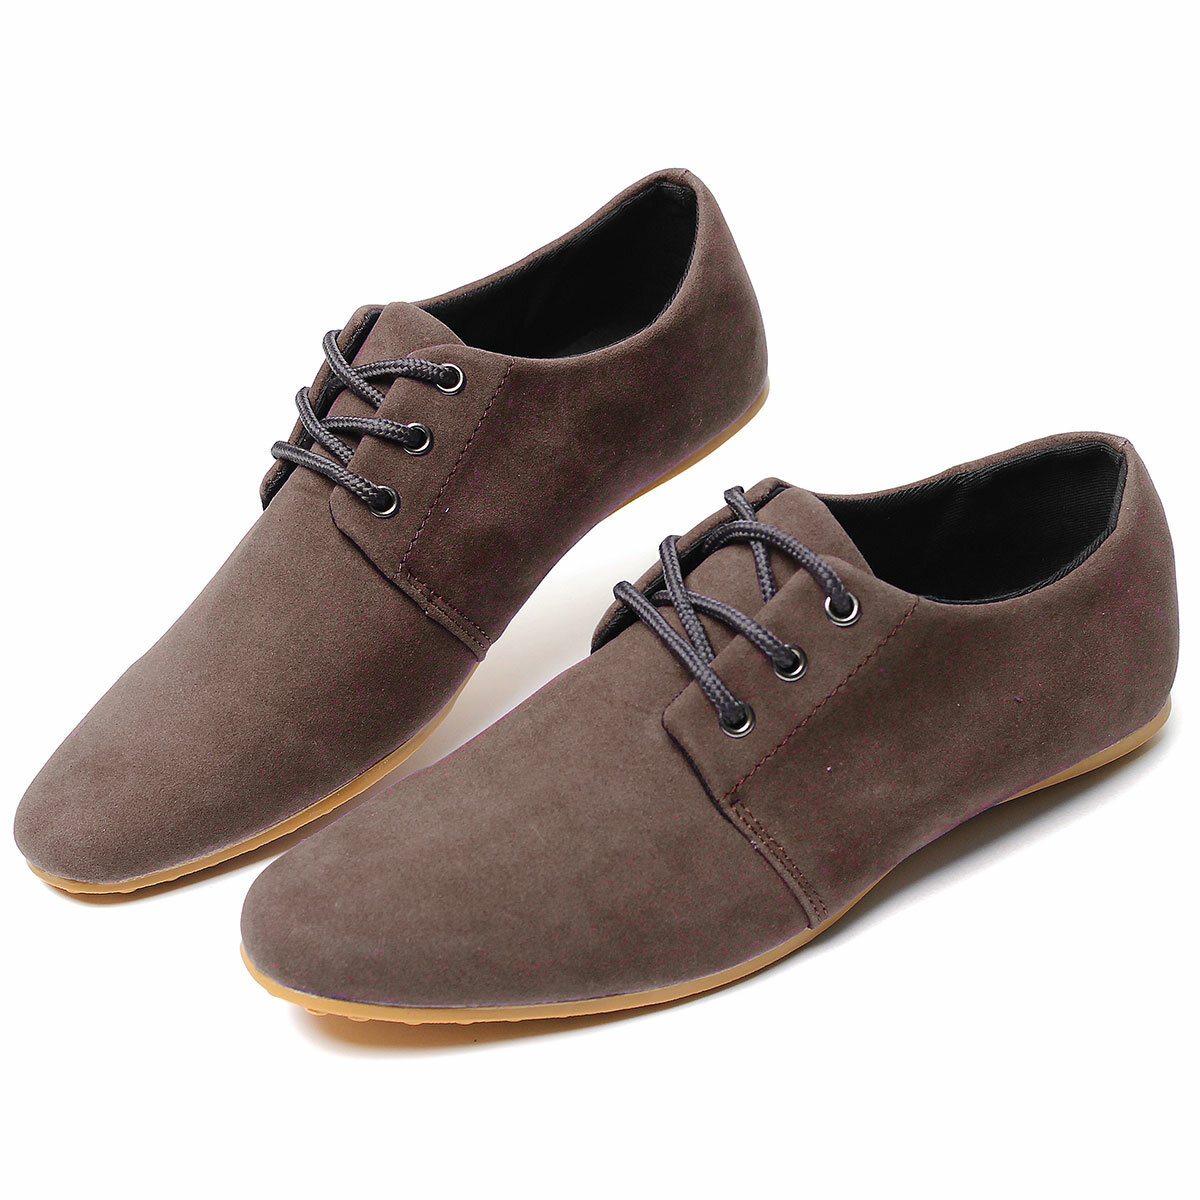 50% OFF on Men Suede Solid Color Lace Up Business Casual Flats